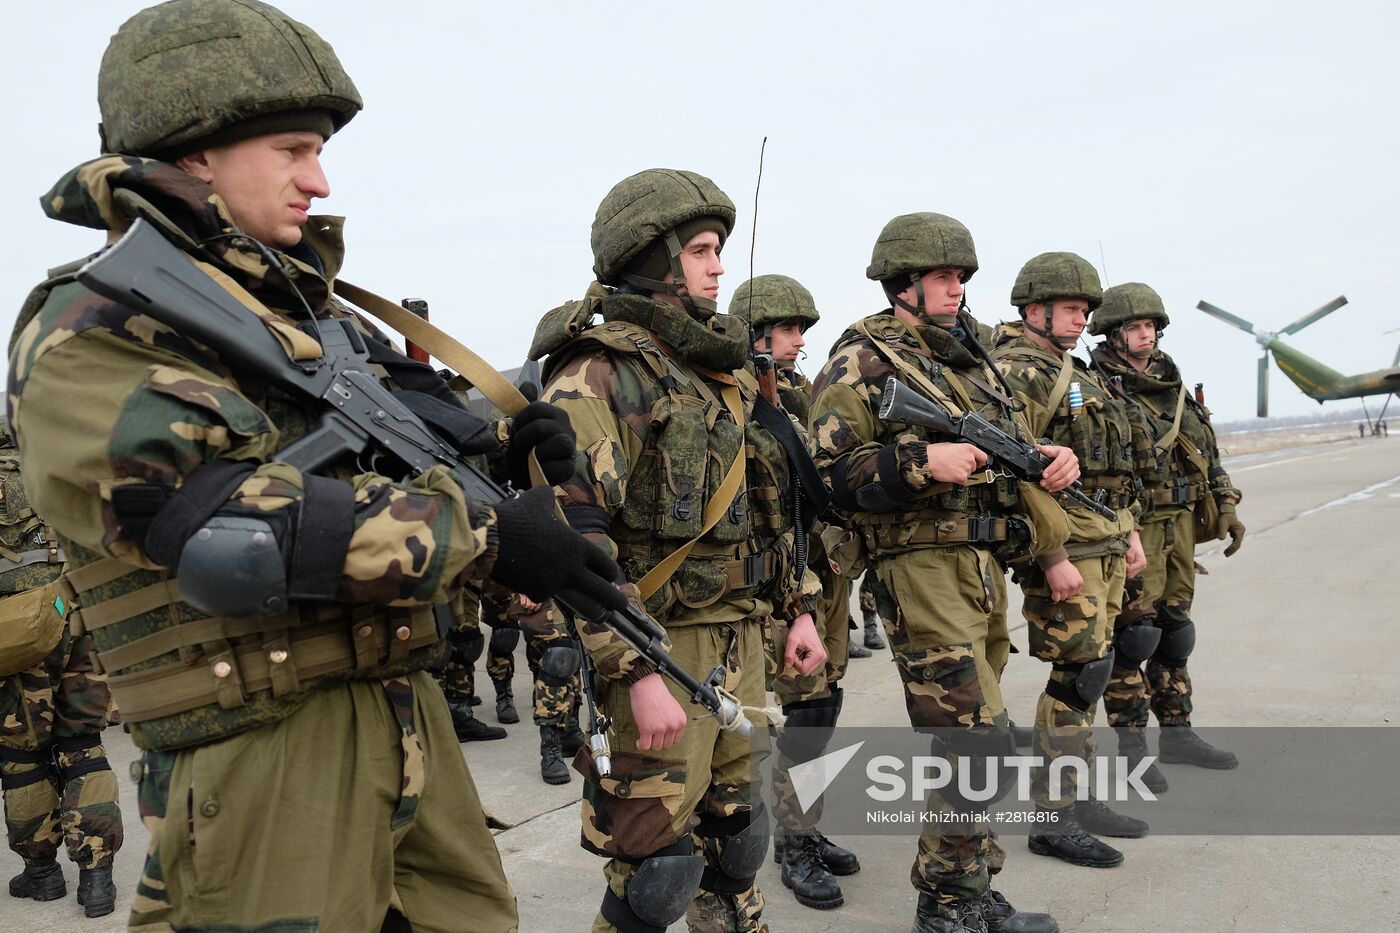 Russia-Belarus joint military exercise in Ulyanovsk Region